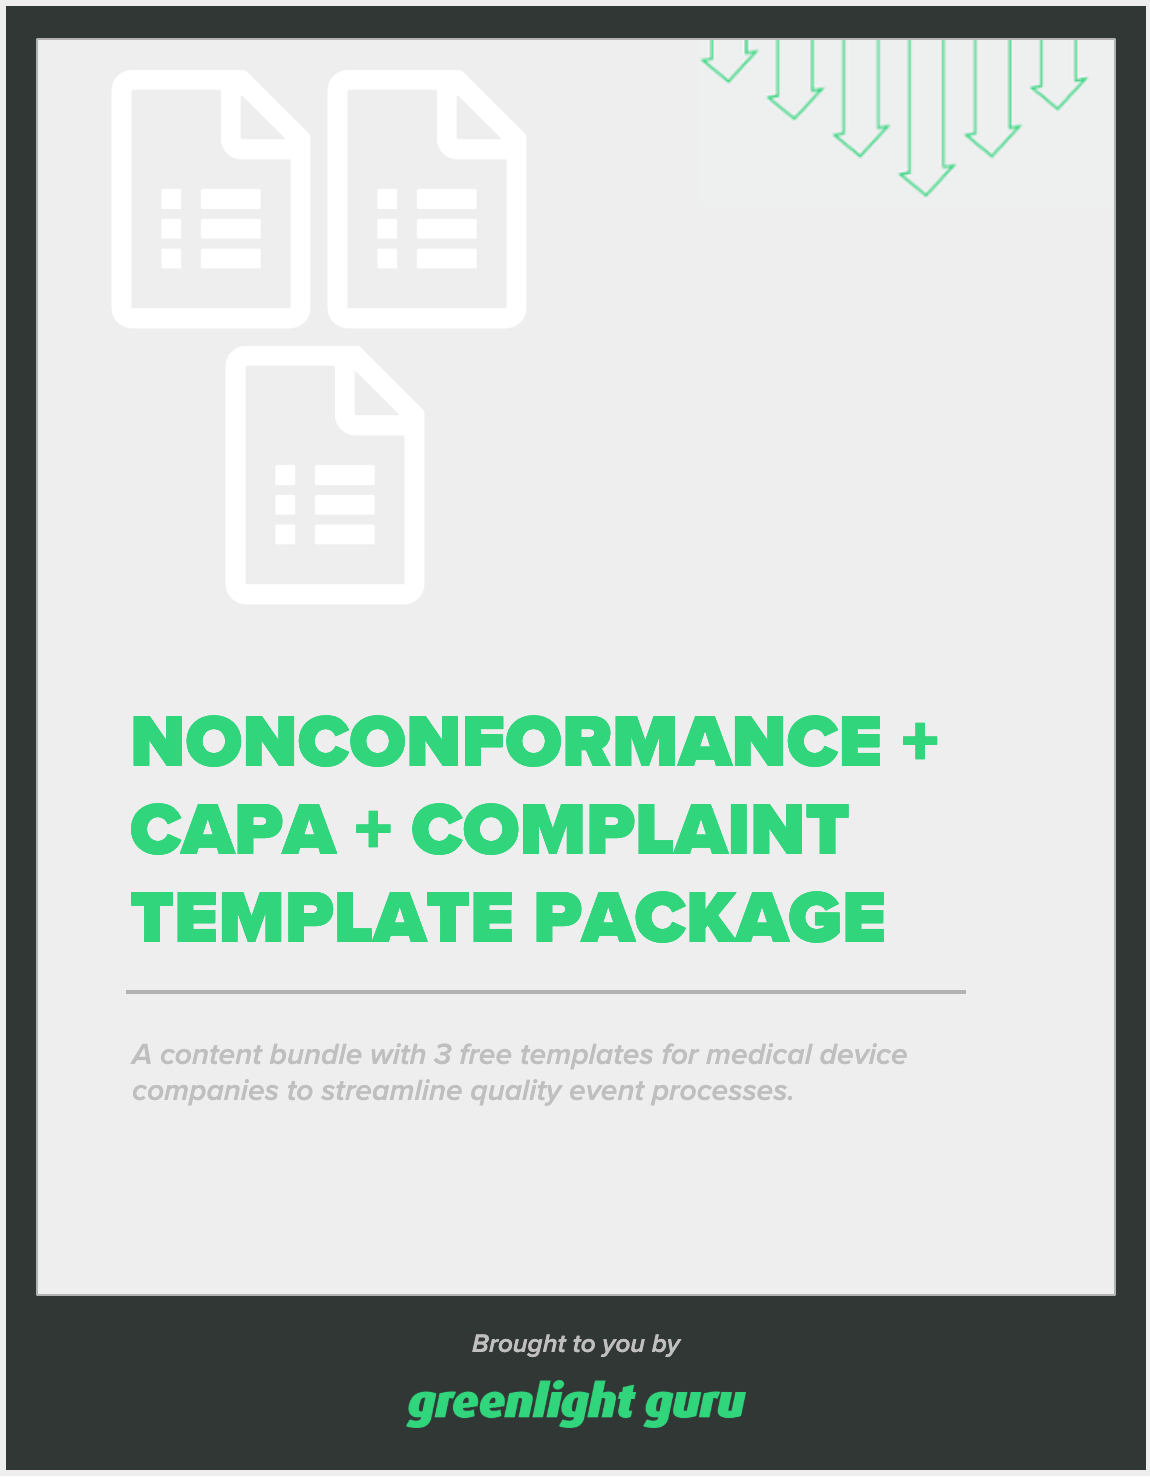 NC+CAPA+Complaint Template Package - slide-in cover